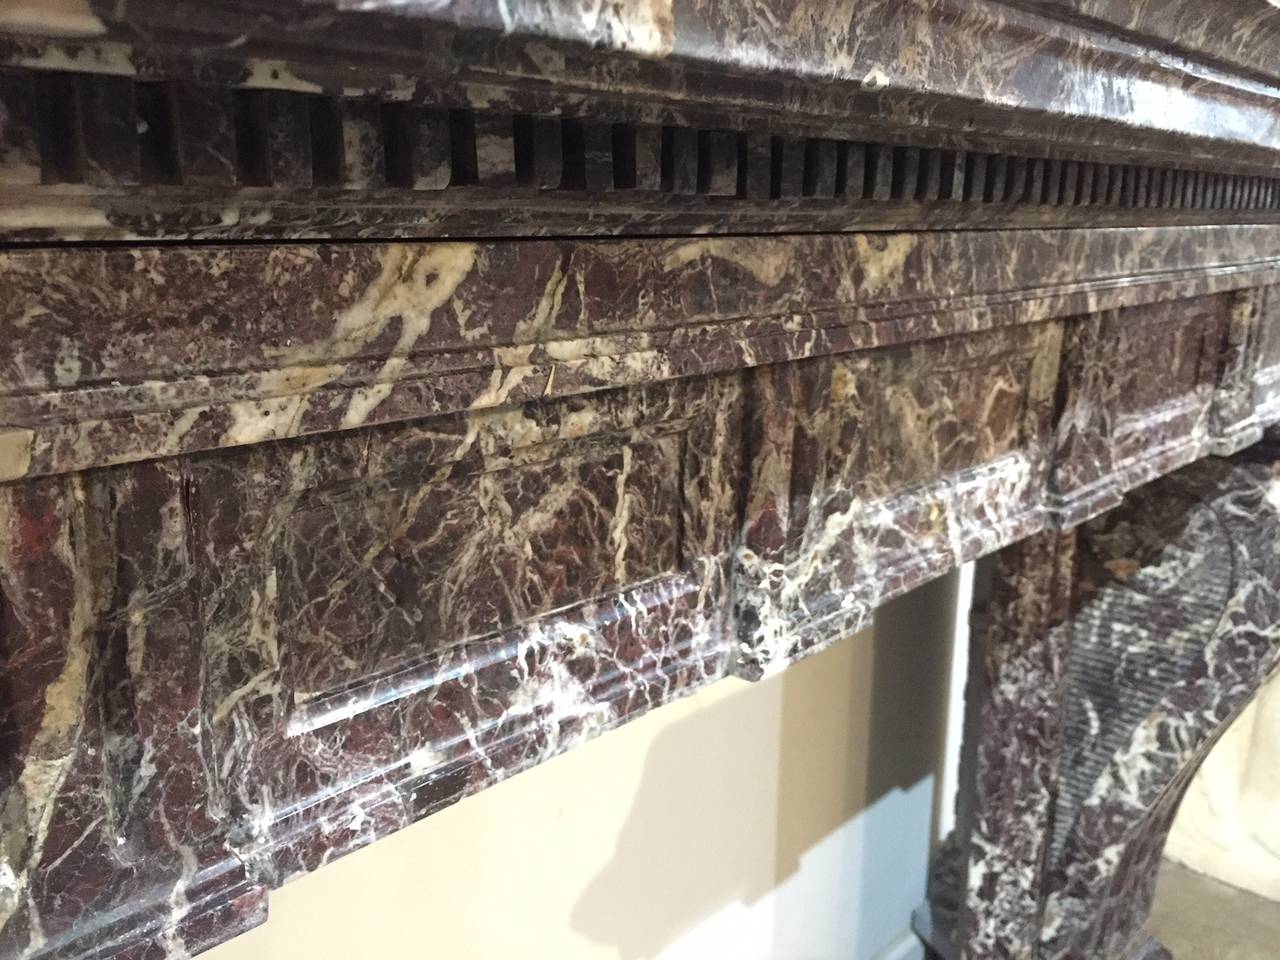 Invite ornate, French beauty into your home with this large Louis XIV marble mantle. Carved in France circa 1850, this monumental, heavily weighted mantle would make an impressive statement in an elegant living or dining room. This mantle is